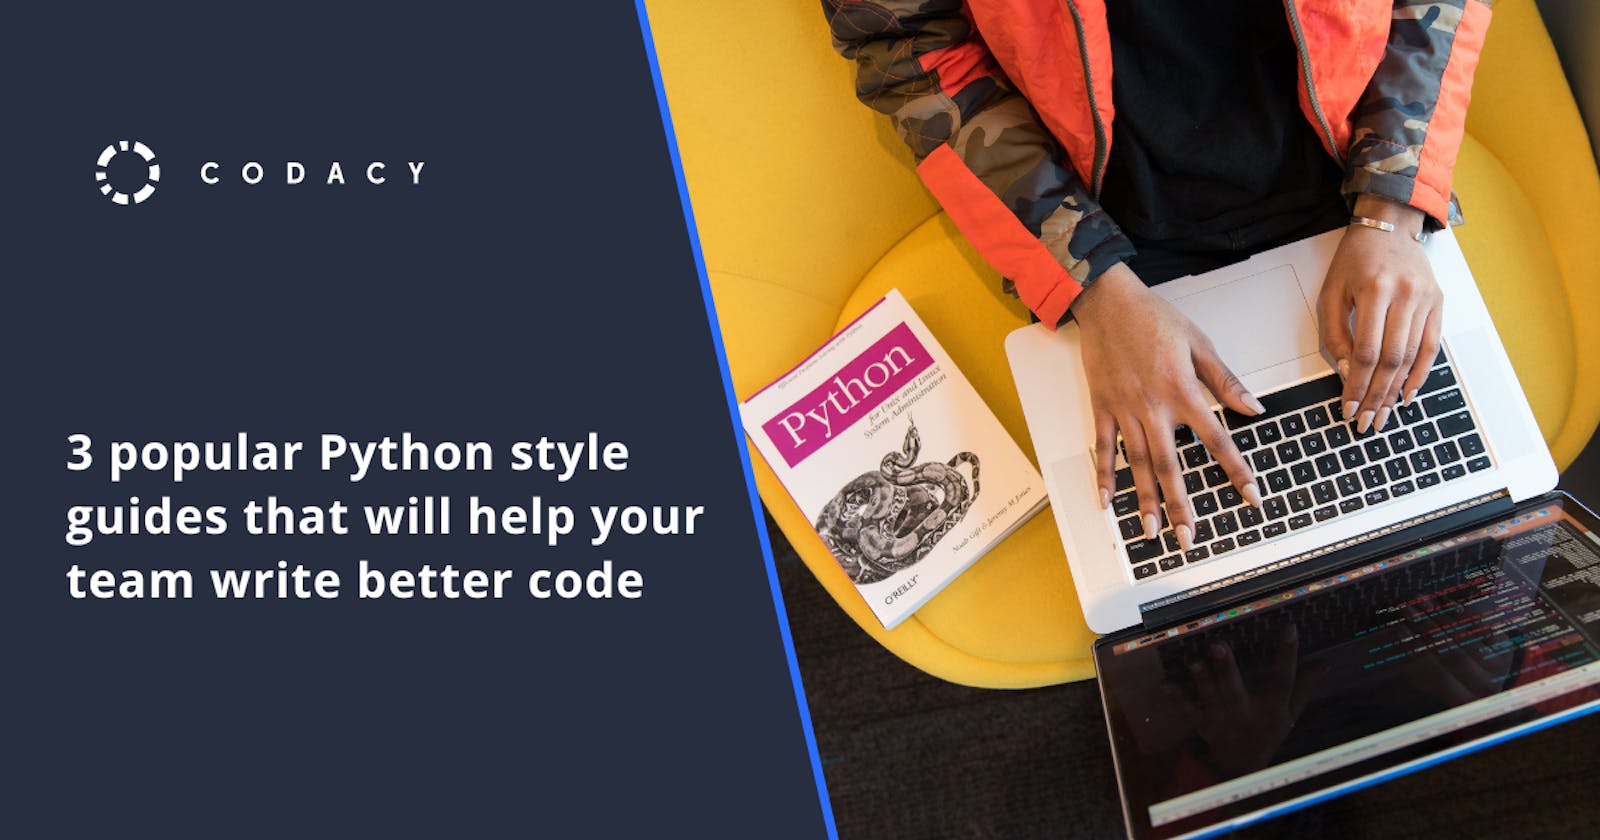 3 popular Python style guides that will help your team write better code